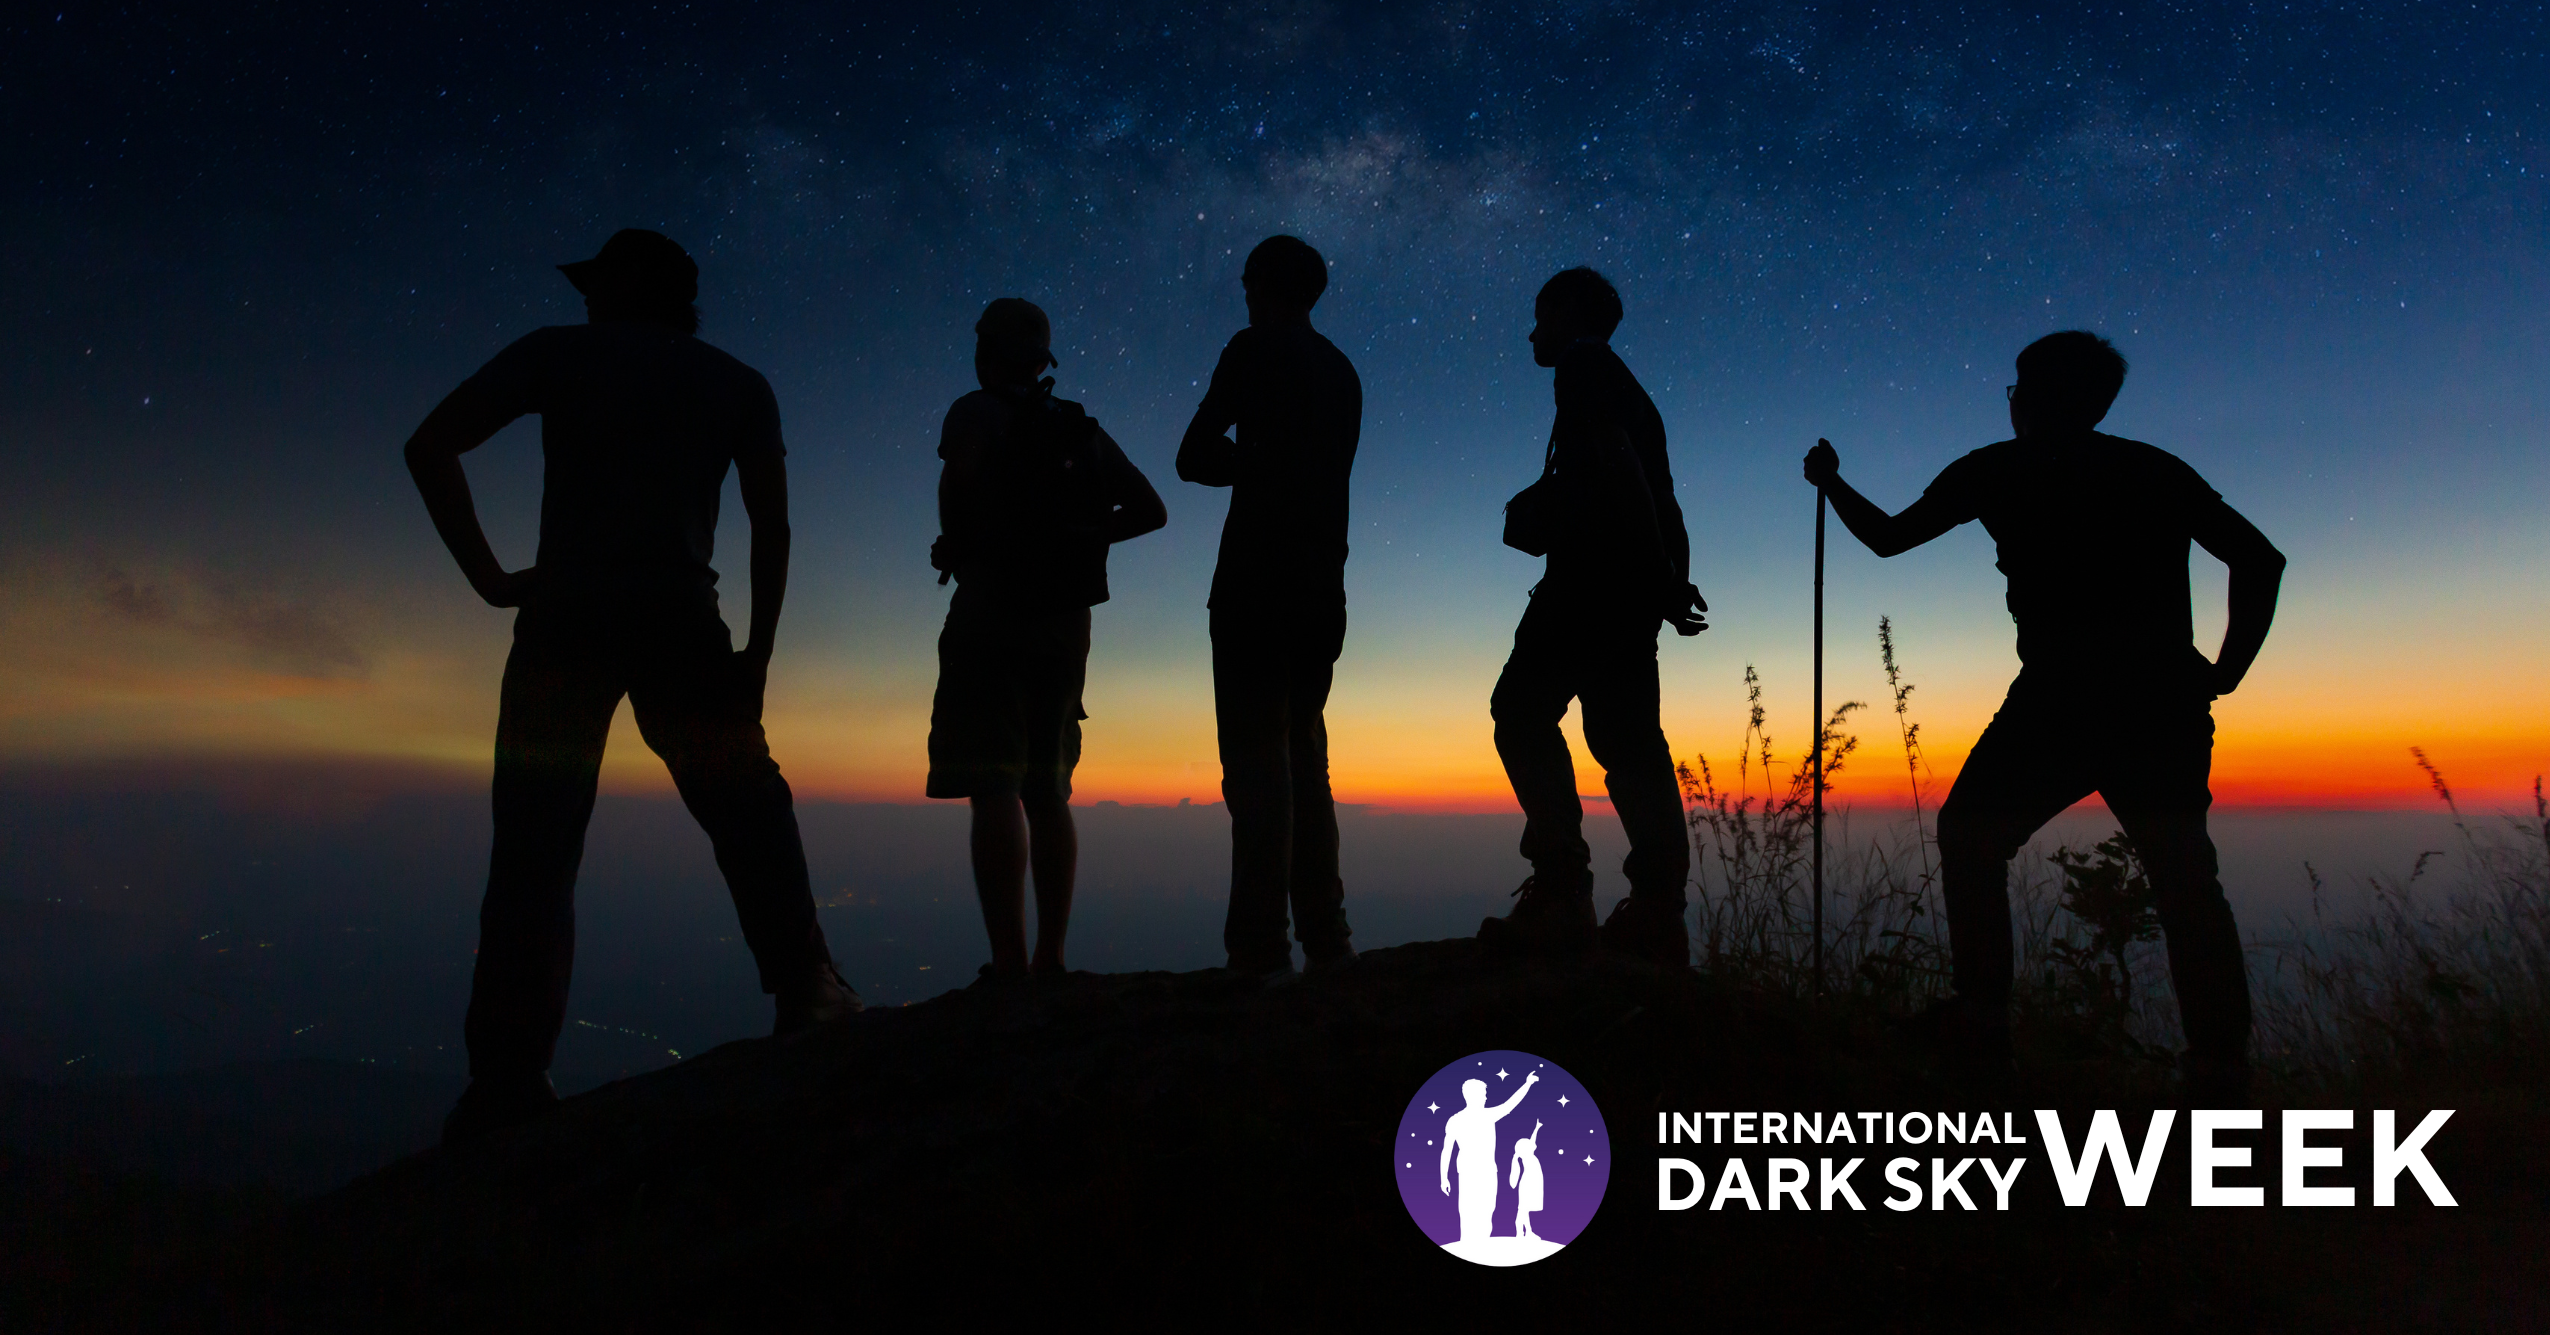 A group of hikers silhouetted by the sunset and starry sky